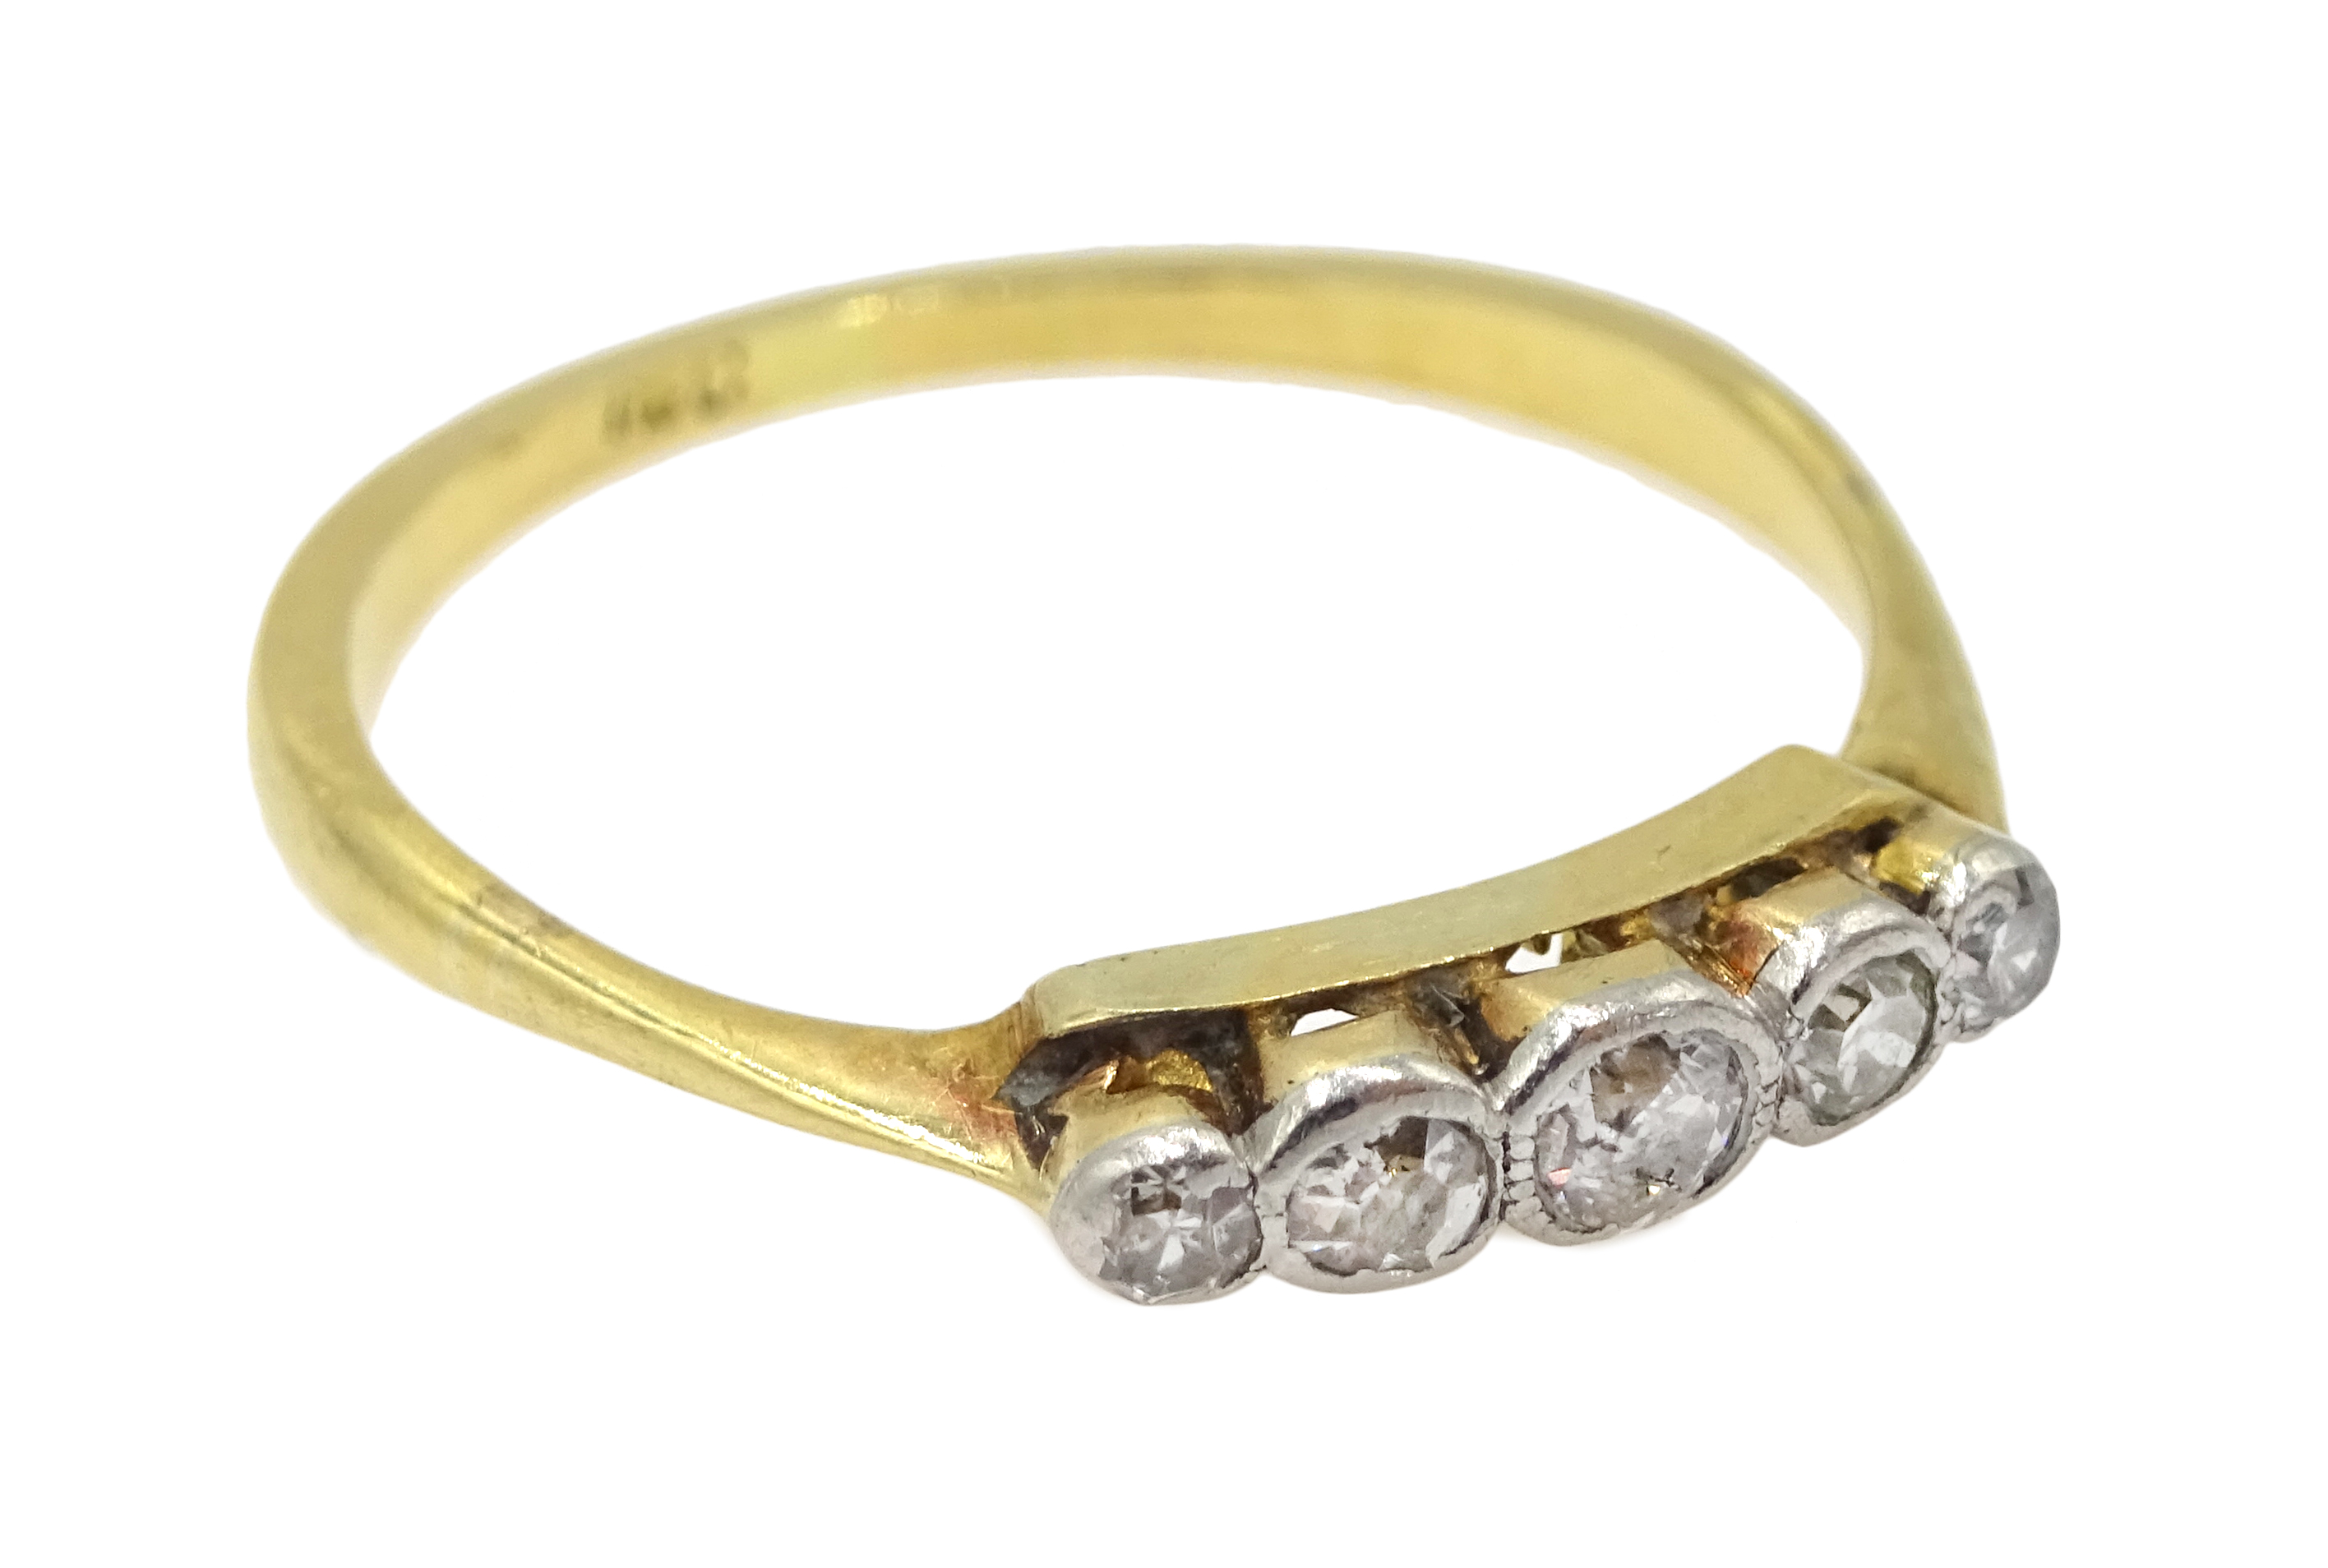 Early 20th century five stone diamond ring, - Image 2 of 3